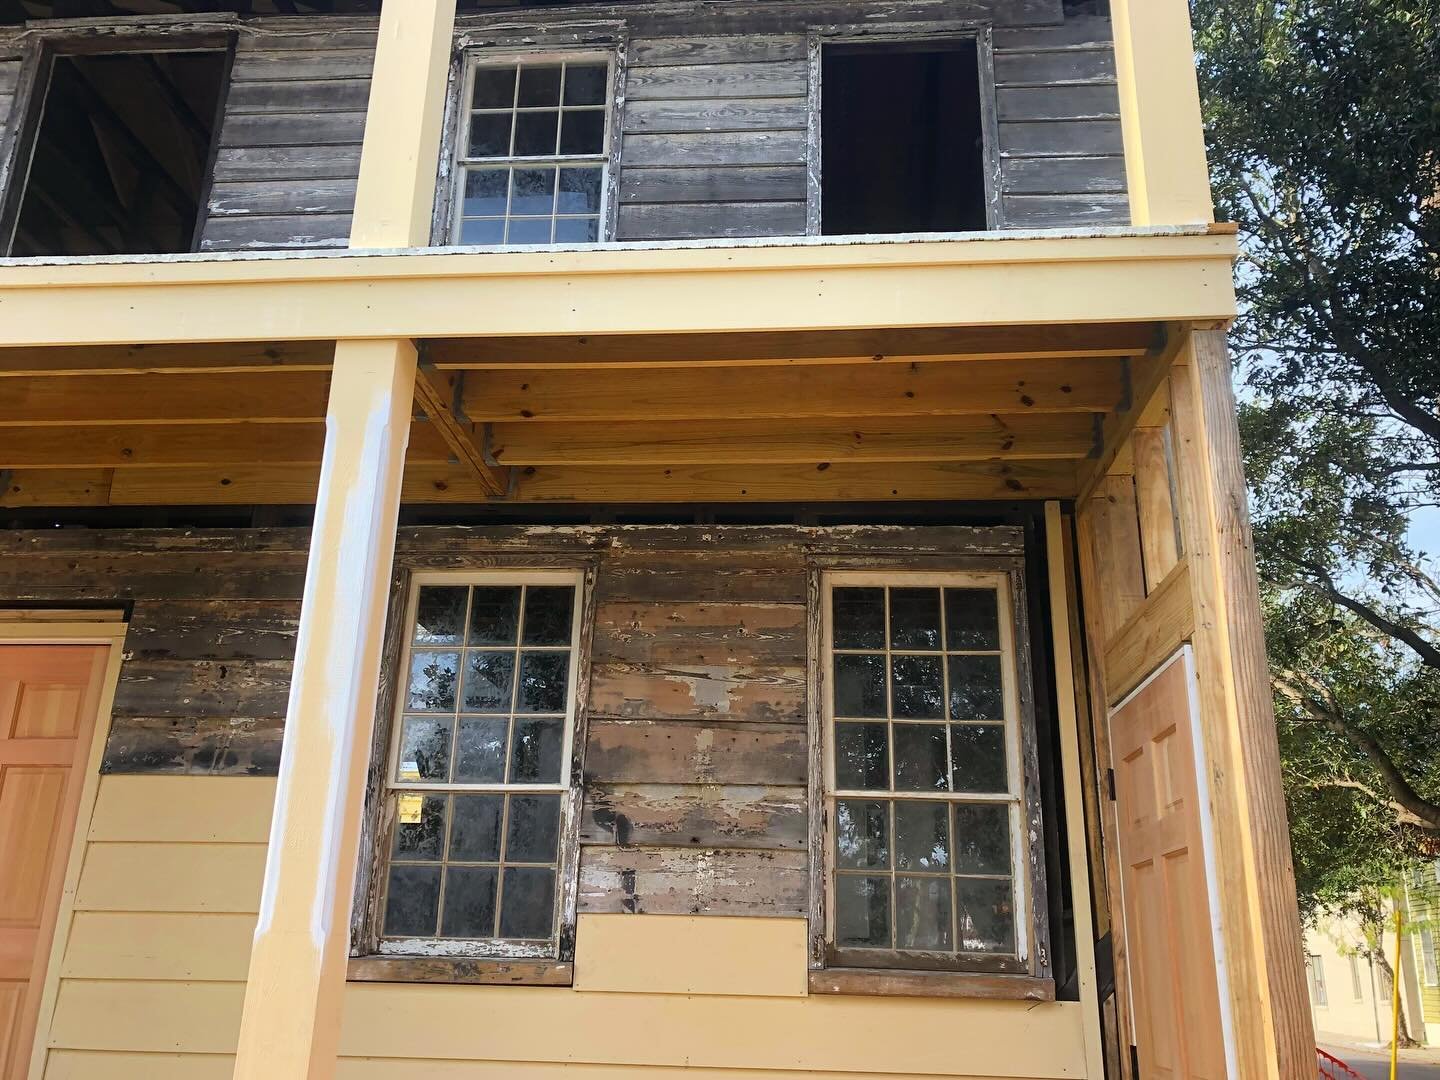 Love that we&rsquo;re able to restore these 200+ year old windows in downtown Charleston. What a work in progress!

.

#HamiltonBuildersSC #HamiltonBuildersCHS #CharlestonConstruction #CharlestonRenovation #CharlestonBuilders #SCConstruction #SCRenov